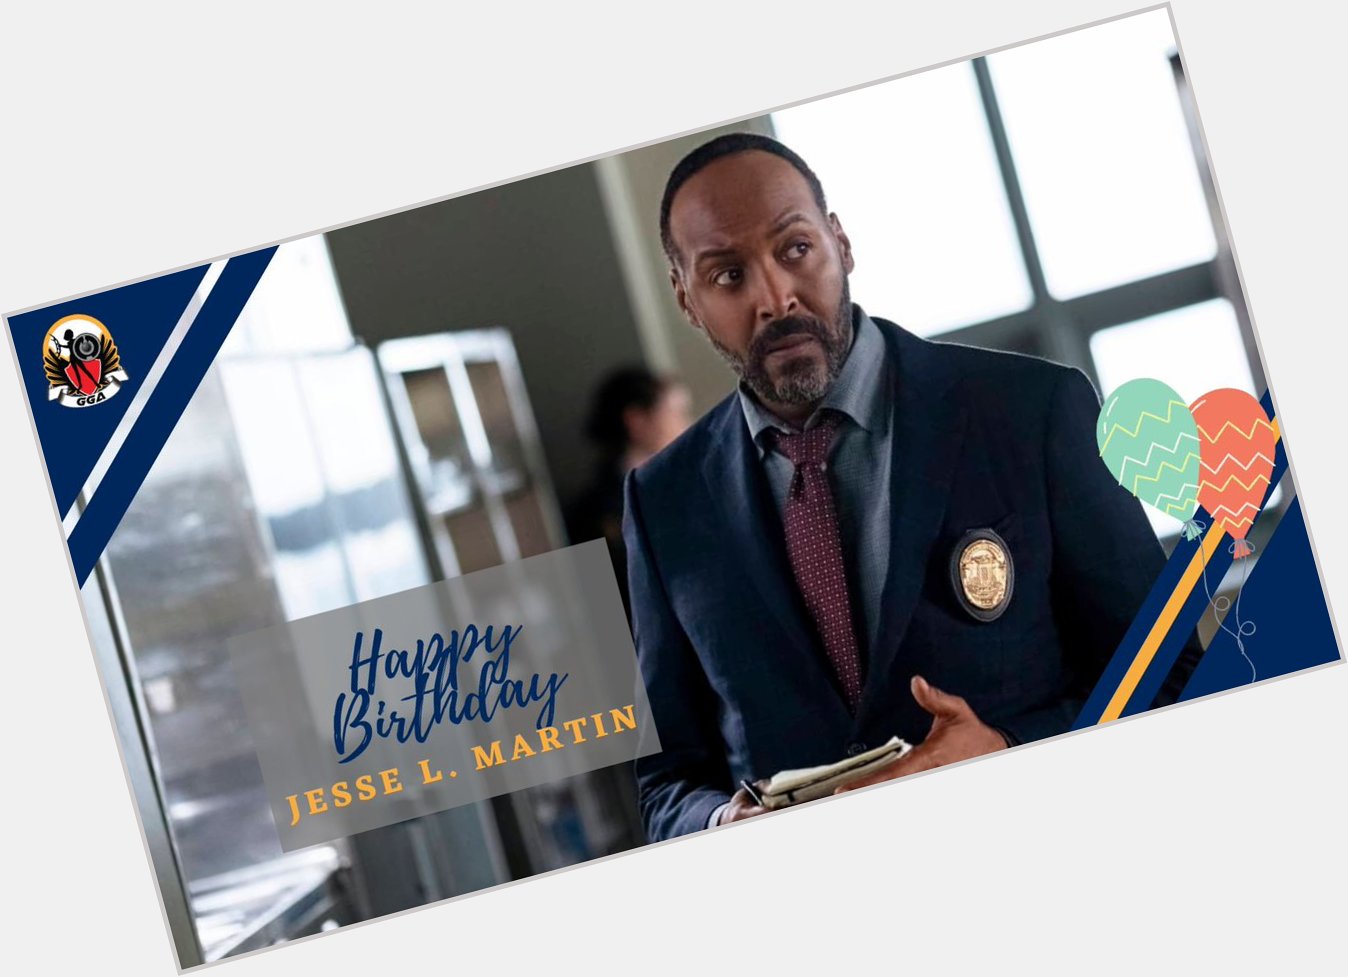 Happy Birthday, Jesse L. Martin!  Which of his roles is your favorite?  